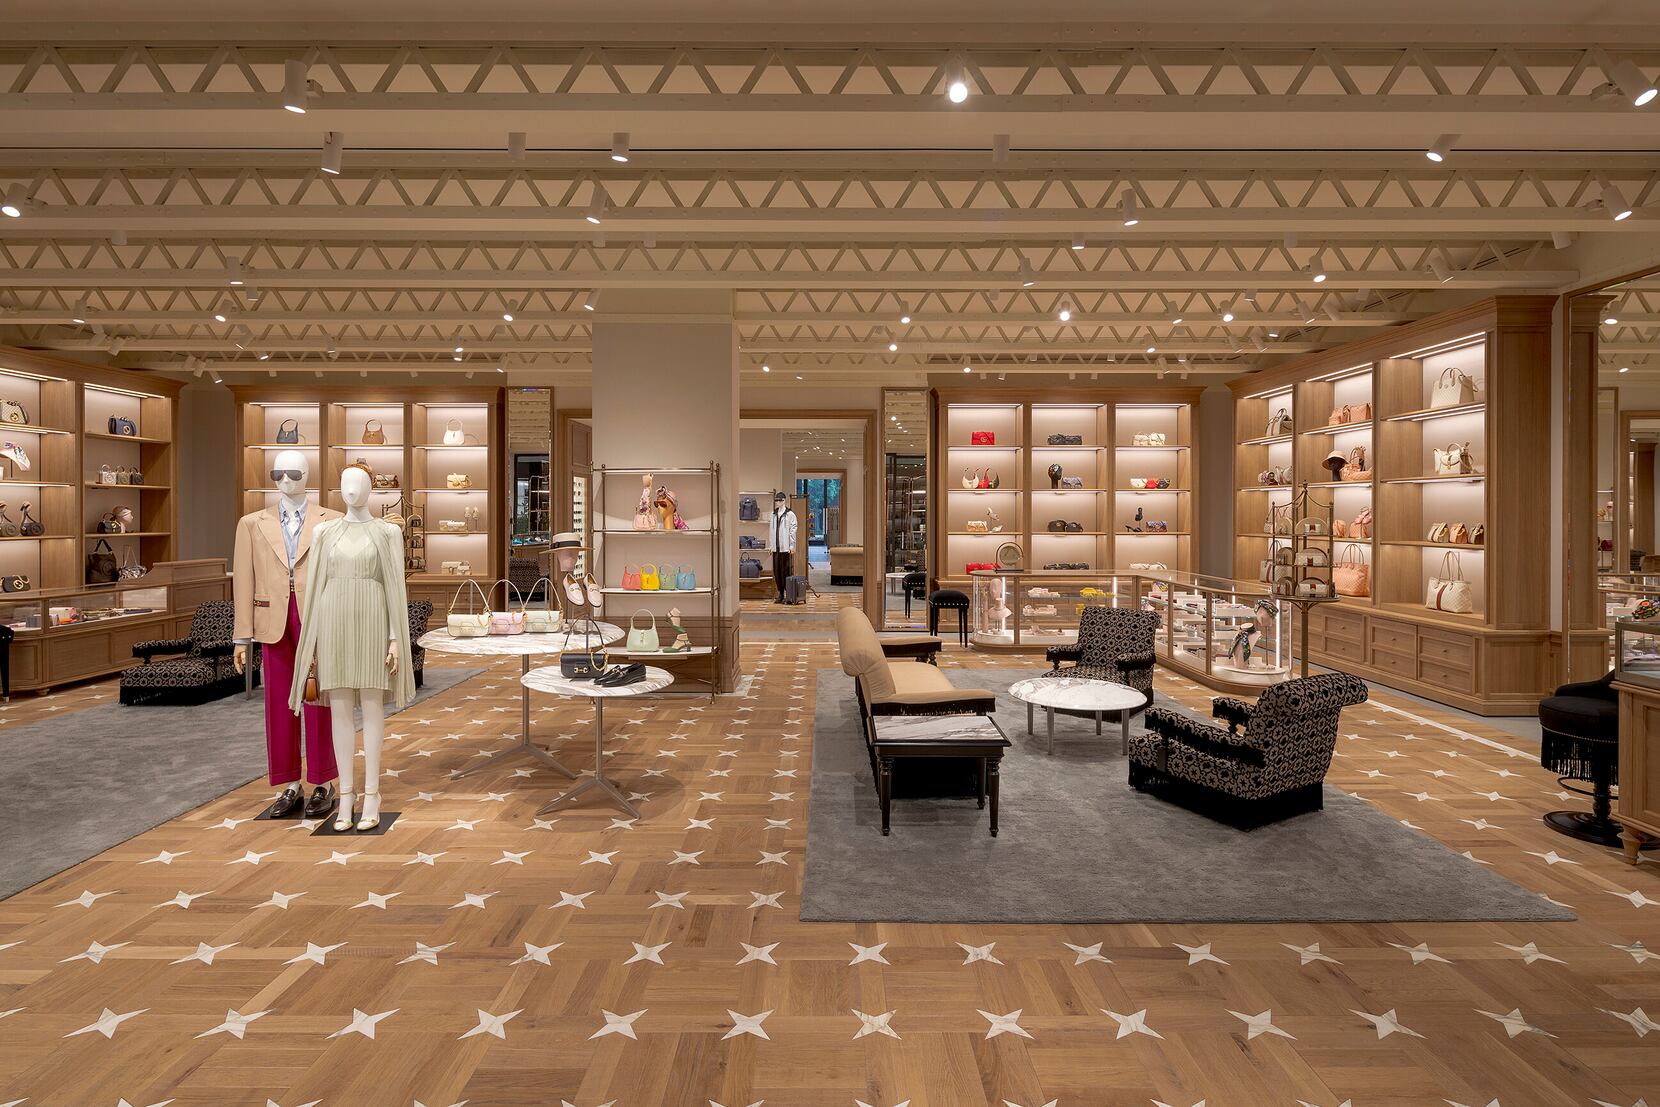 Leatherology Expands Into Retail With NorthPark Center Store